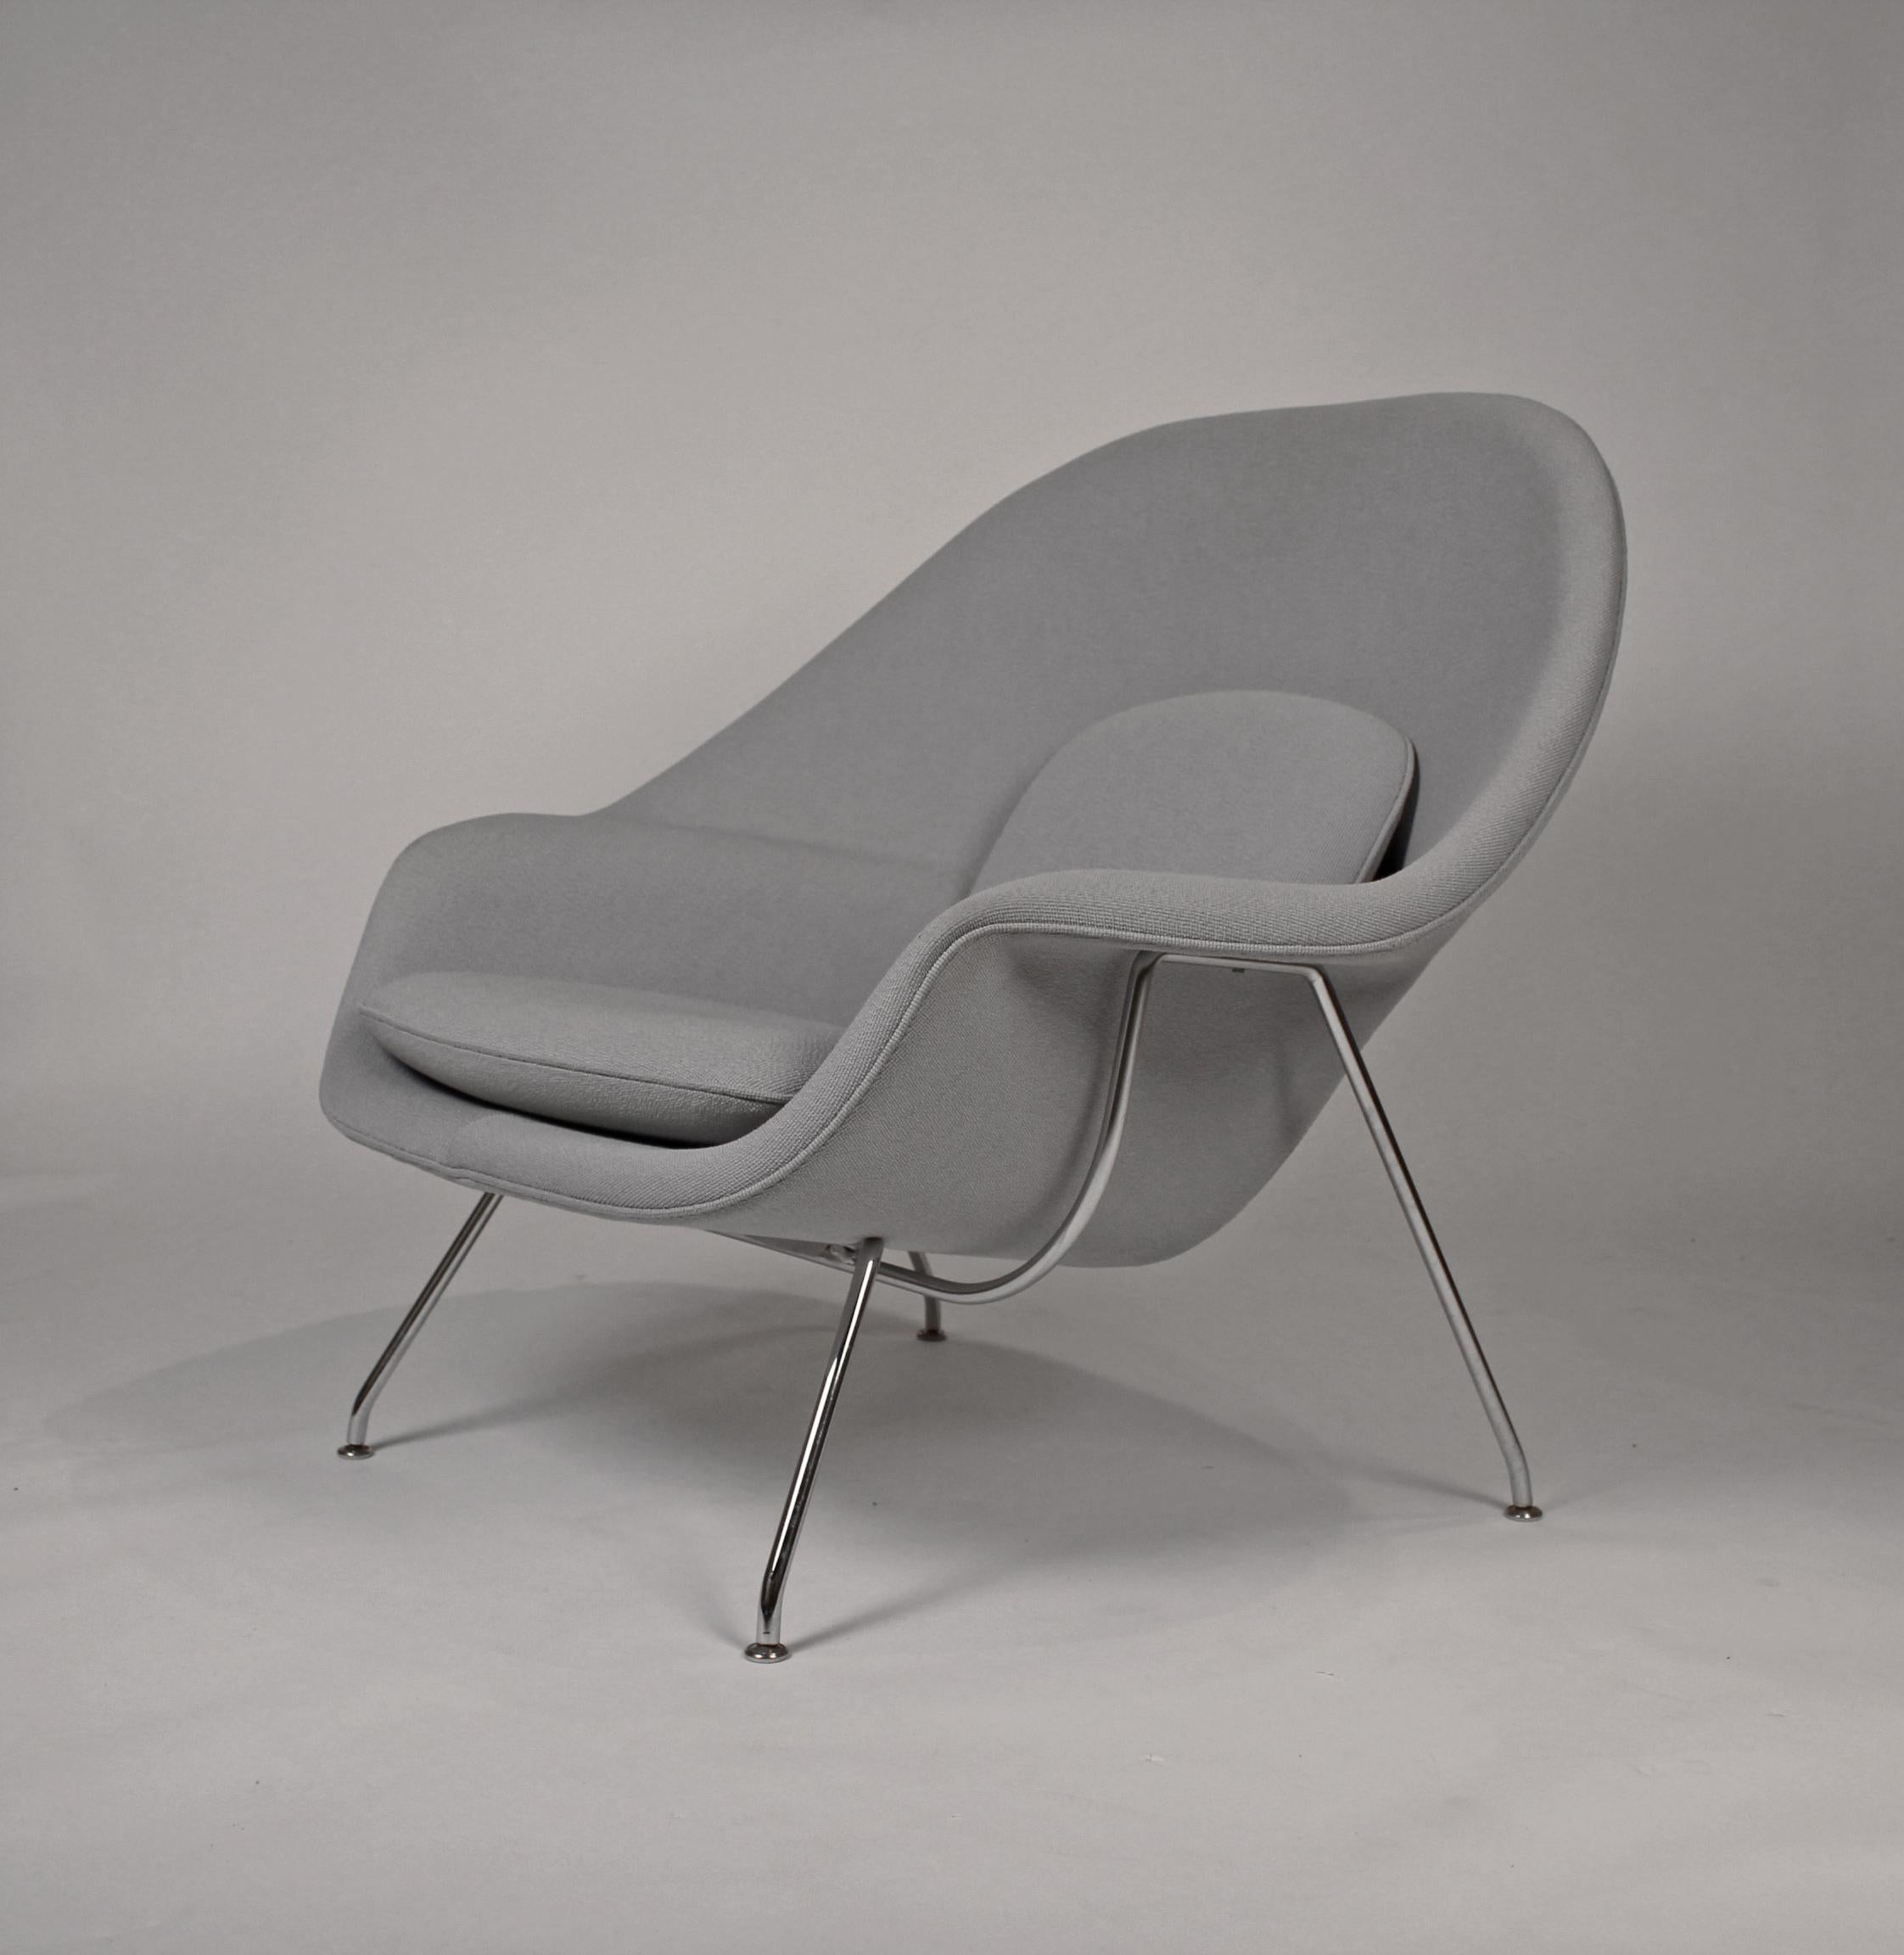 Very clean pair of womb chairs designed by Eero Saarinen and produced by Knoll. Retains paper label to underside. $3400 each. Original grey upholstery.